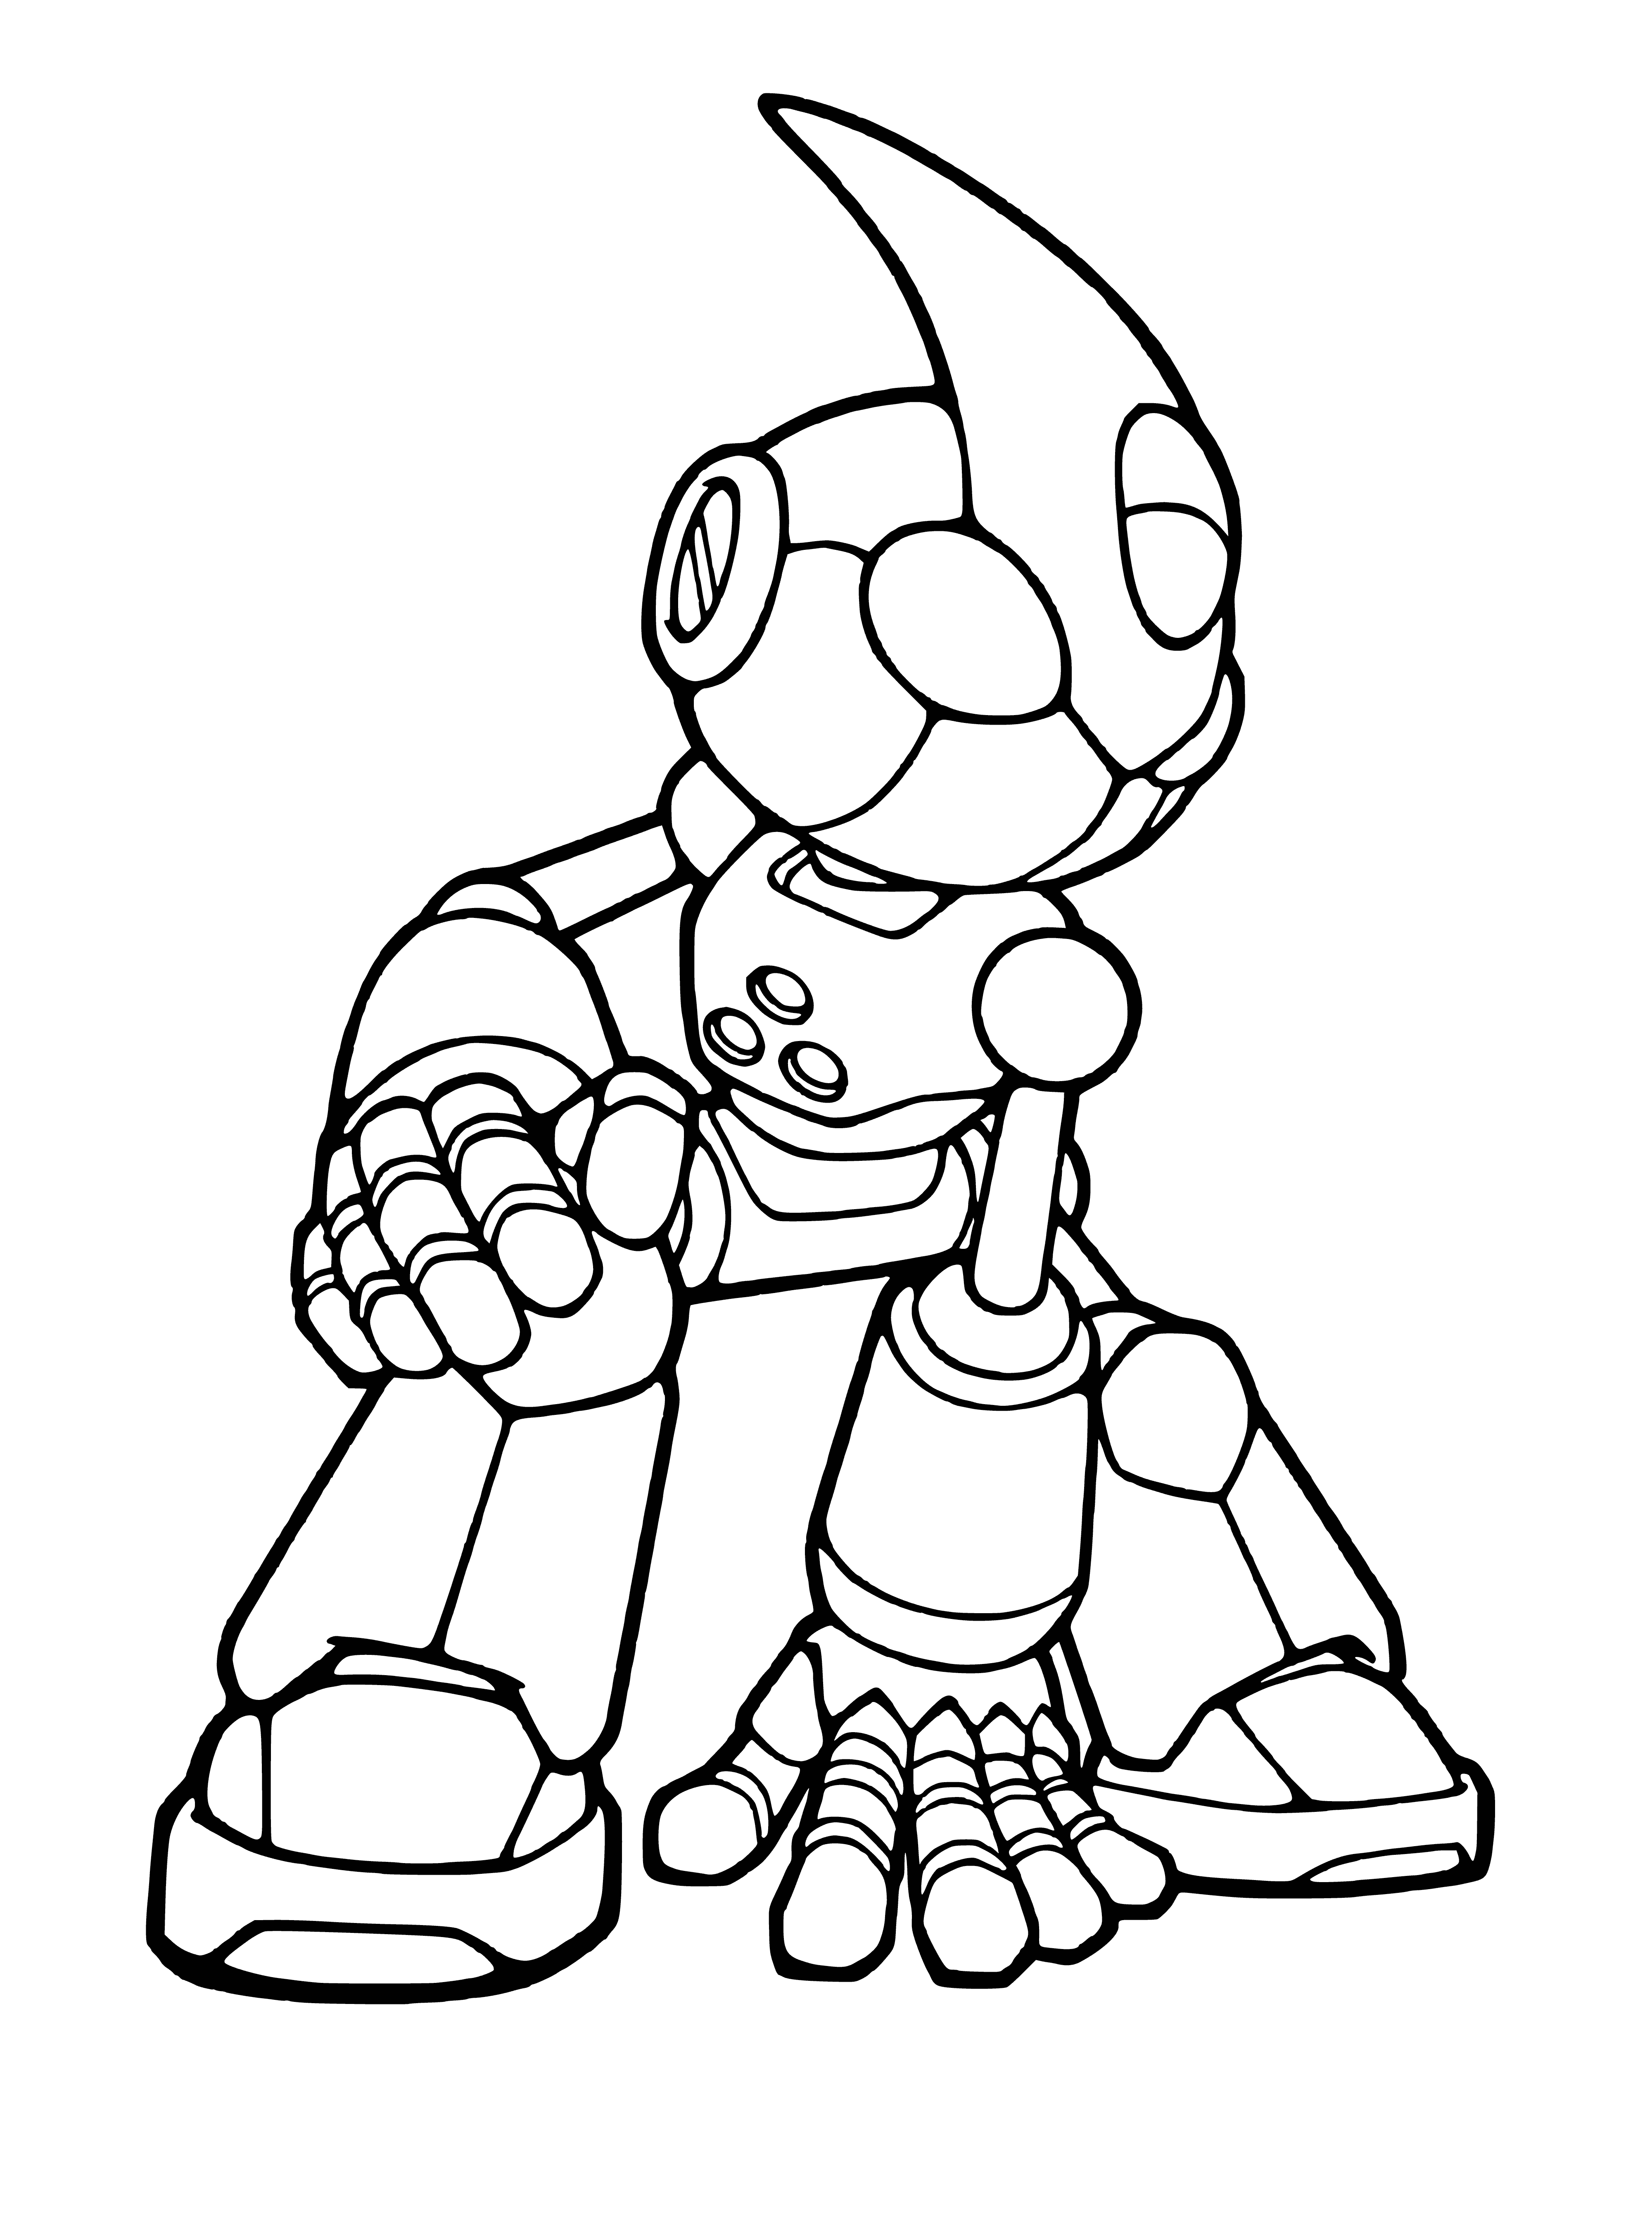 coloring page: Emerl is a powerful robotic ally who can copy the moves of those he fights. With free will, he befriends Sonic and helps him fight Eggman.